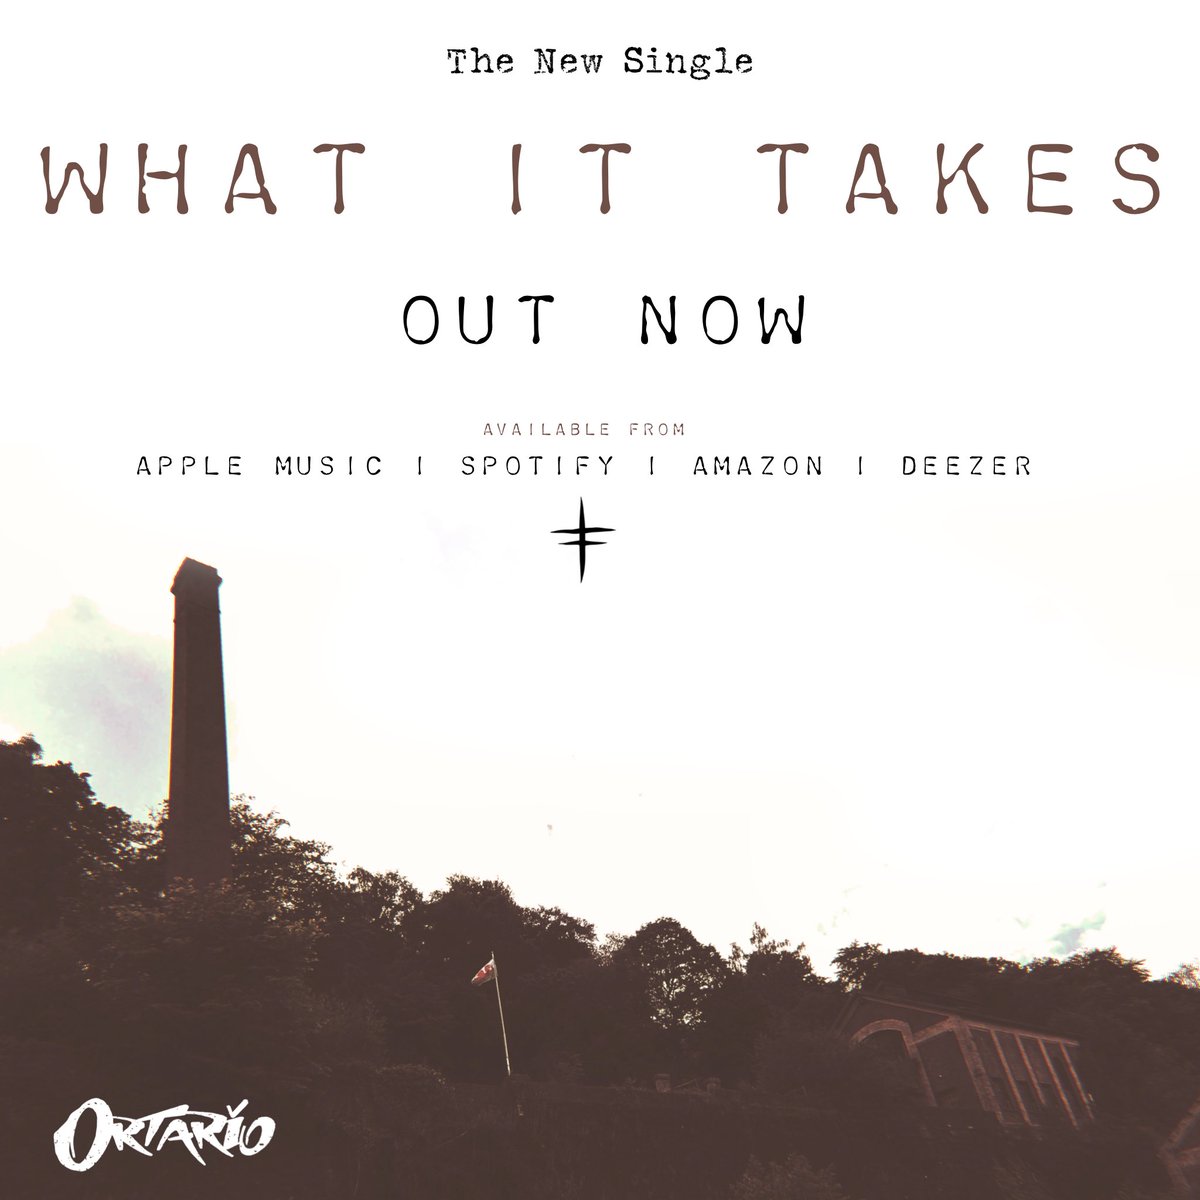 WHAT IT TAKES - THE NEW SINGLE BY ORTARIO Download and stream via the links below ⬇️ (Other platforms are available) Apple Music: apple.co/3a9dMyv Spotify: spoti.fi/3bHstJB Amazon: amzn.to/3OTdzy3 Deezer: bit.ly/3AggpsU Ortario x